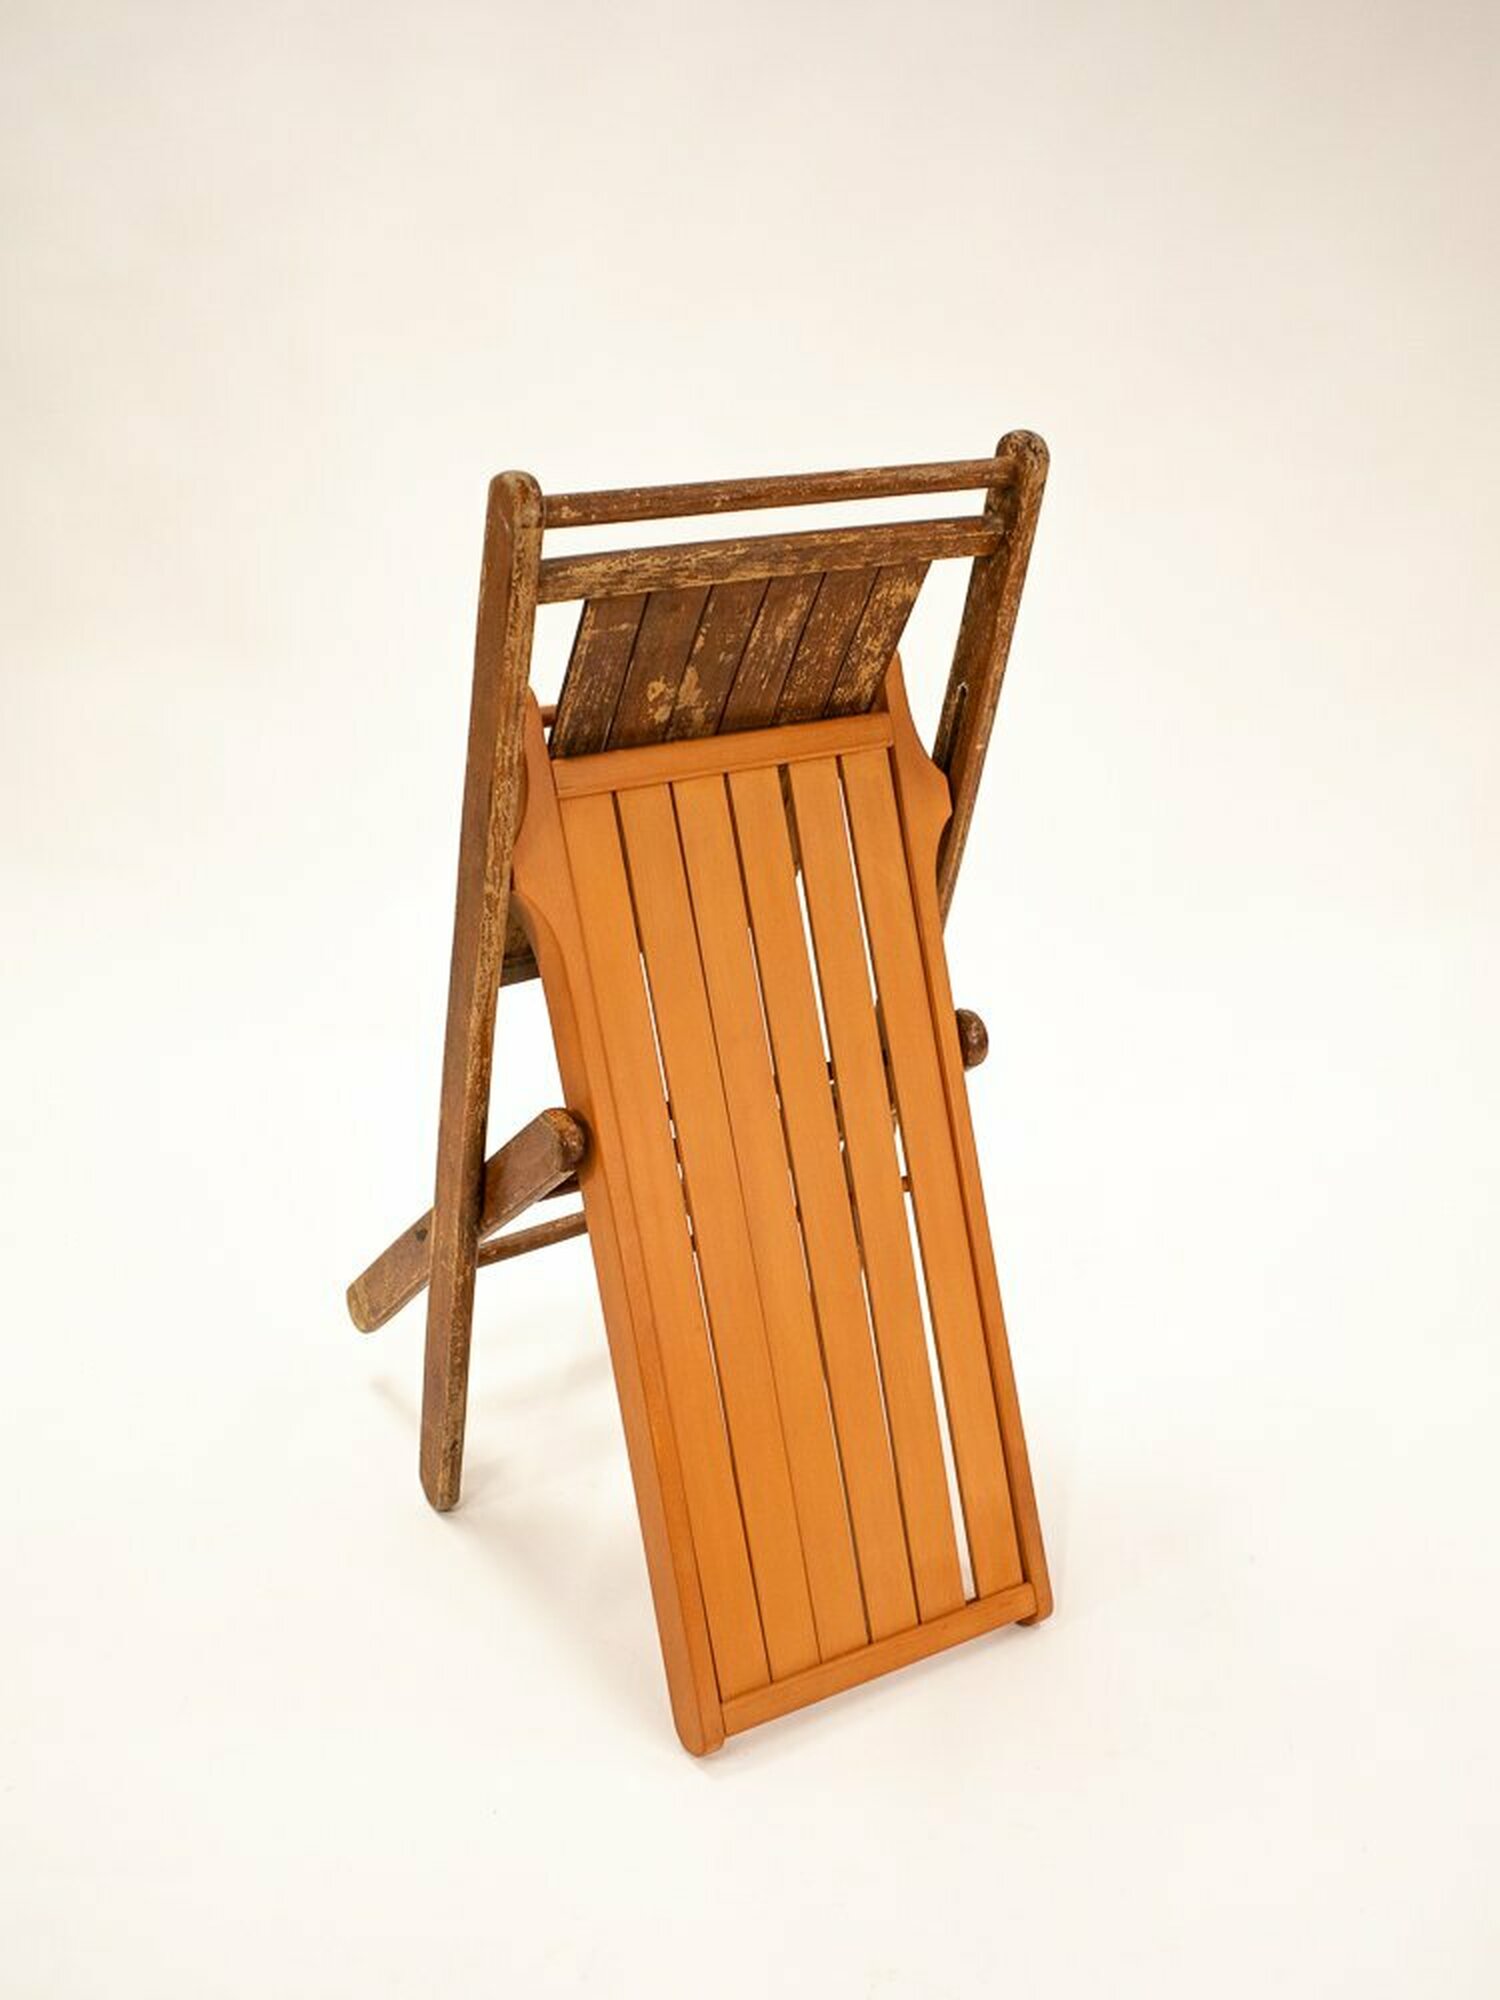 Folding Chair with Long Seat Slats